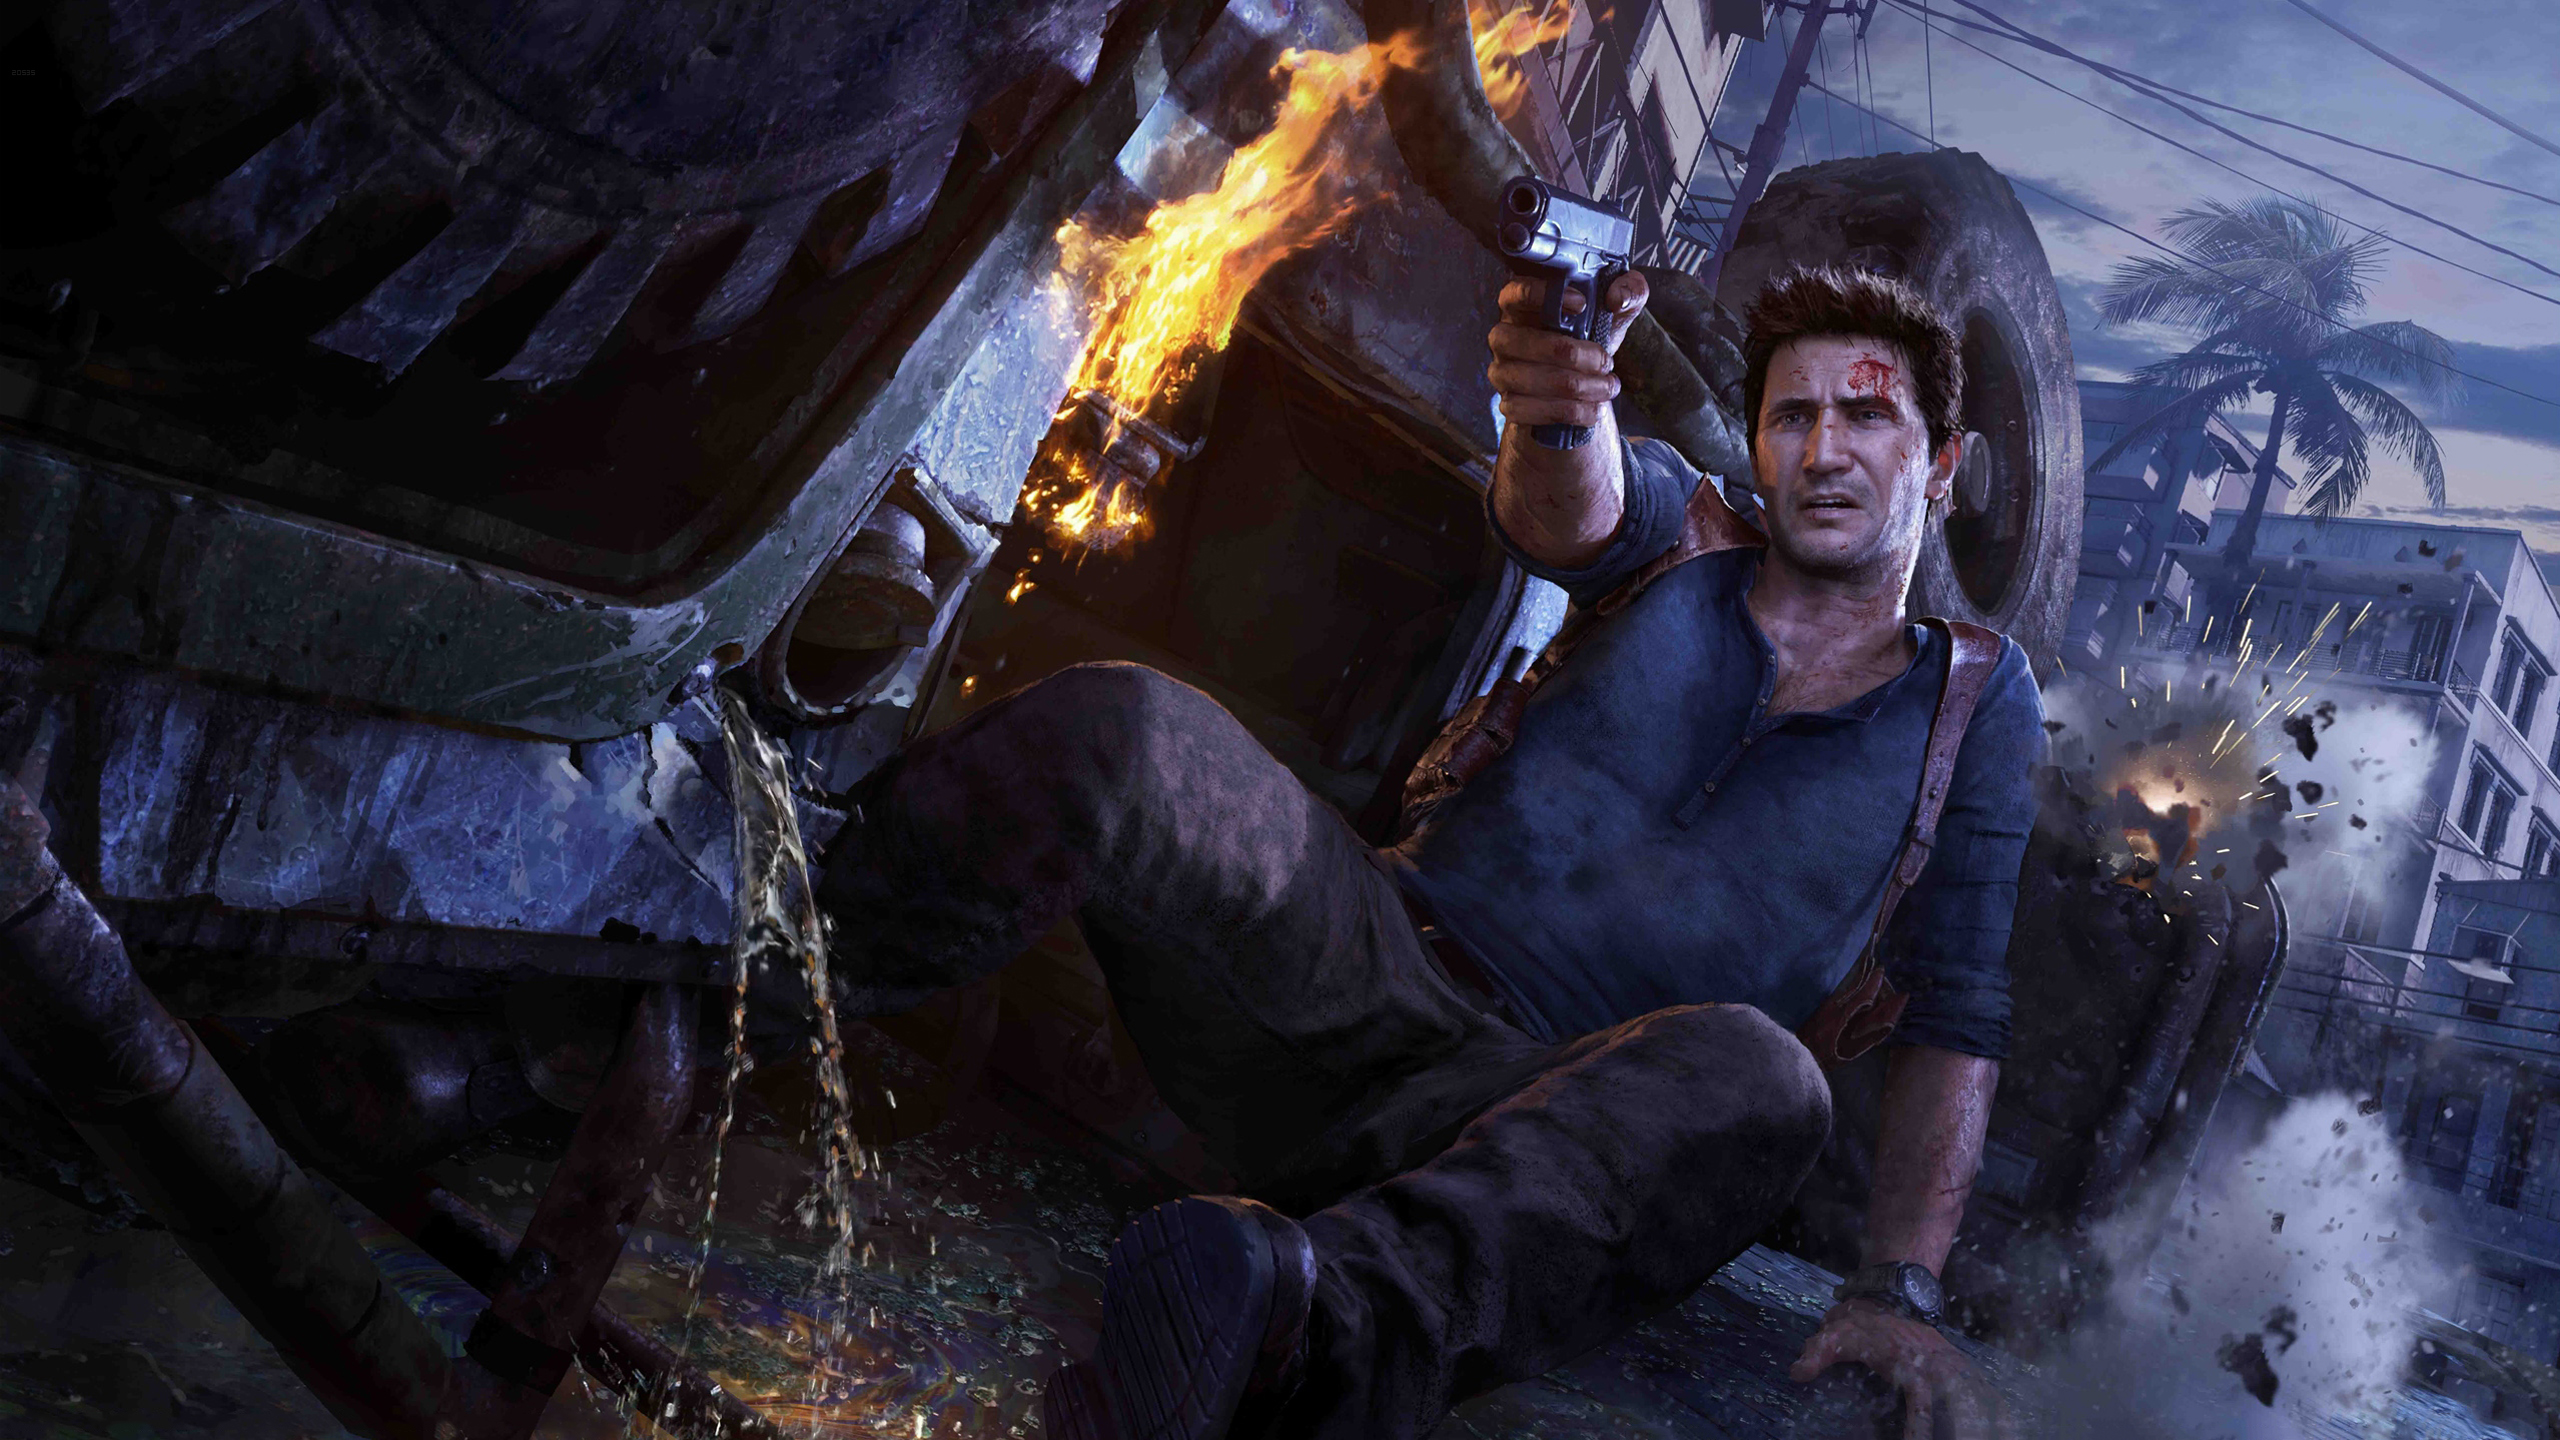 Uncharted 4 A Thiefs End Wallpapers HD Wallpapers 2560x1440